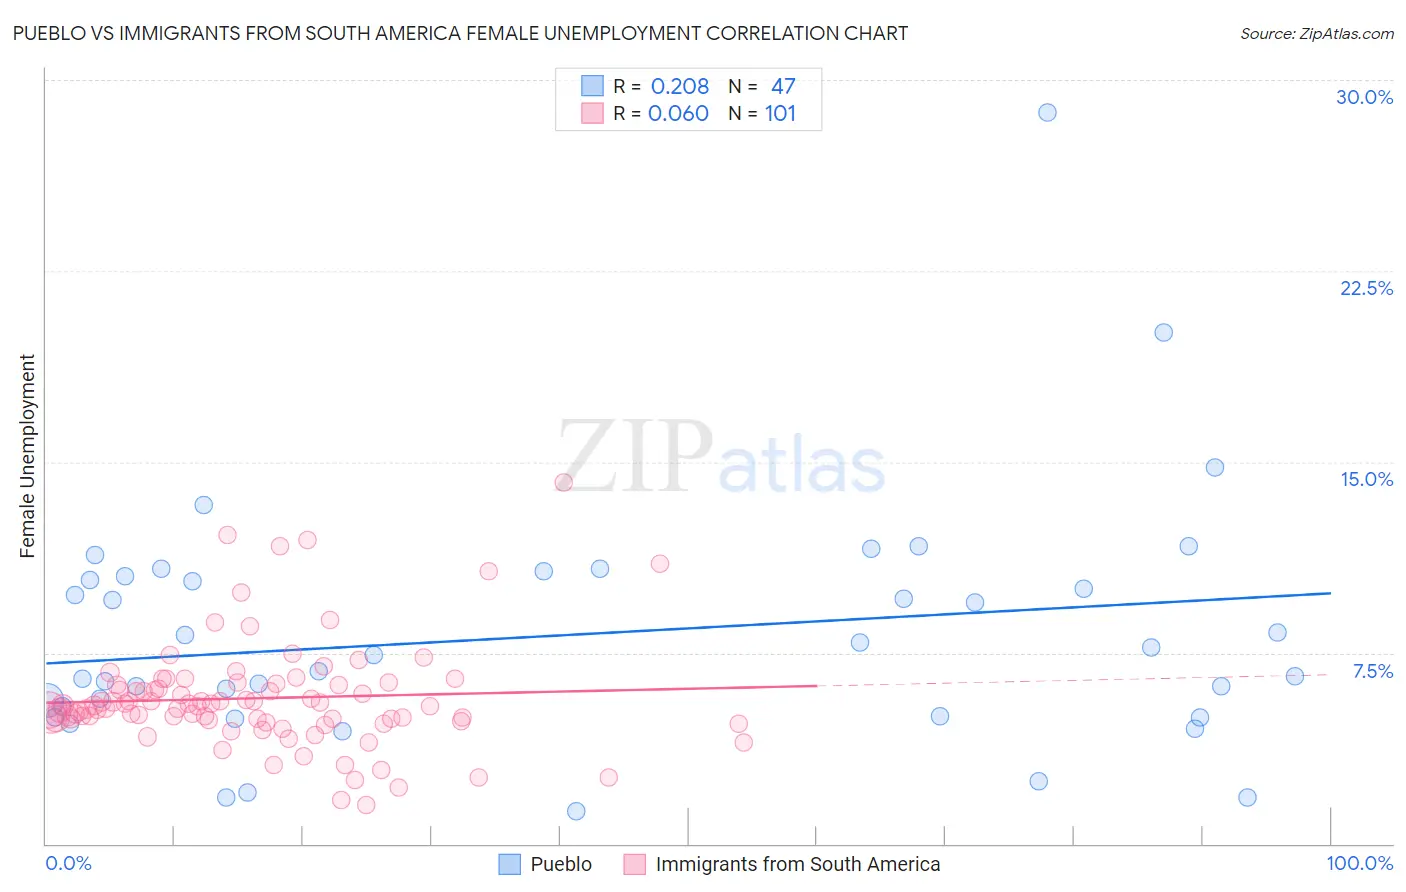 Pueblo vs Immigrants from South America Female Unemployment